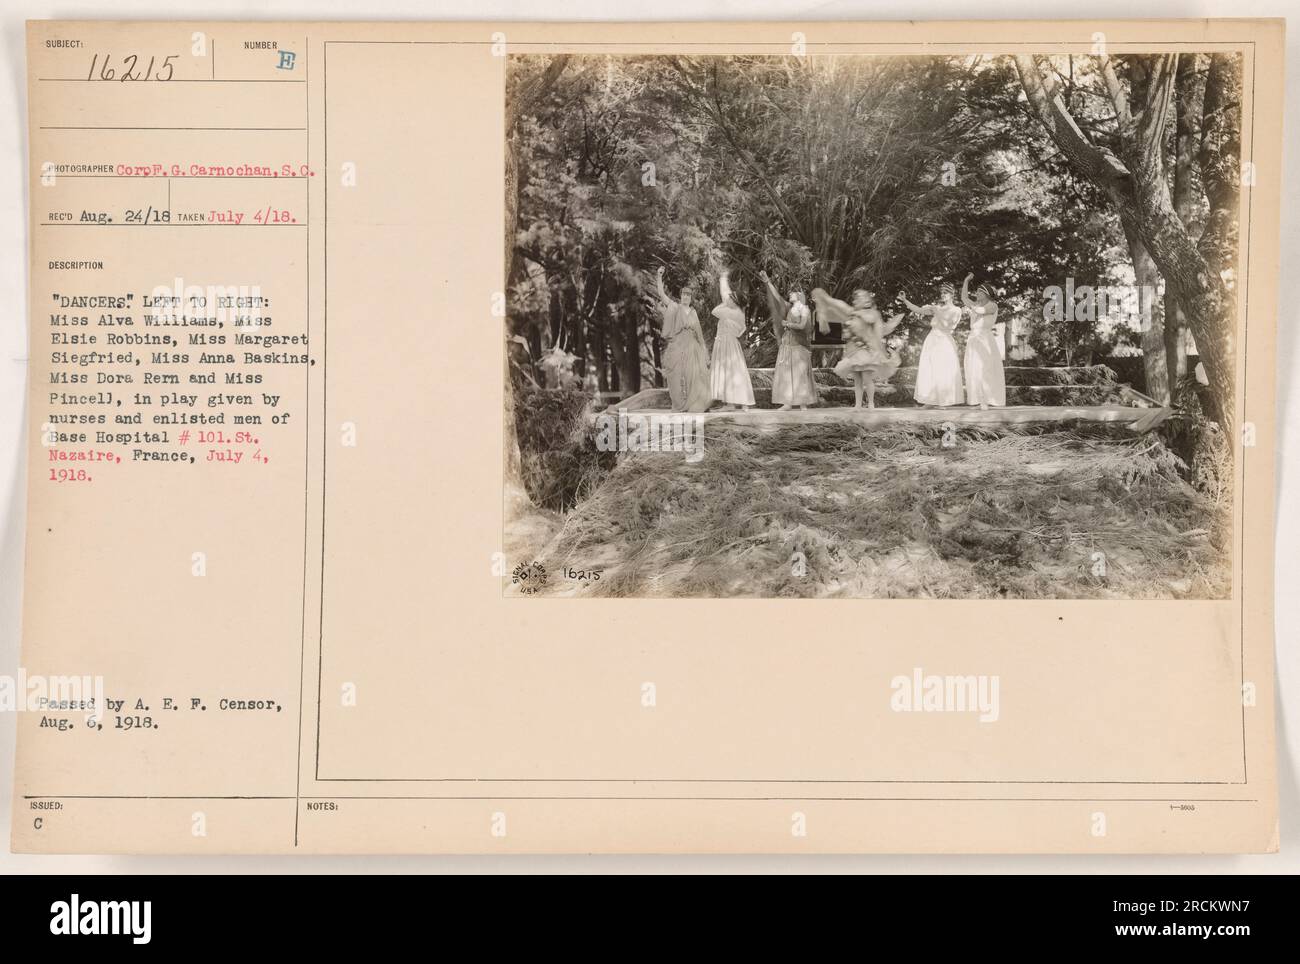 Group of nurses and enlisted men from Base Hospital #101 performing in a play in St. Nazaire, France on July 4, 1918. The dancers, photographed from left to right, include Miss Alve Williams, Miss Elsie Robbins, Miss Margaret Siegfried, Miss Anna Baskins, Miss Dore Rern, and Miss Pincel. Photograph taken by G. Carnochan. Approved by A. E. P. Censor on August 6, 1918. Stock Photo